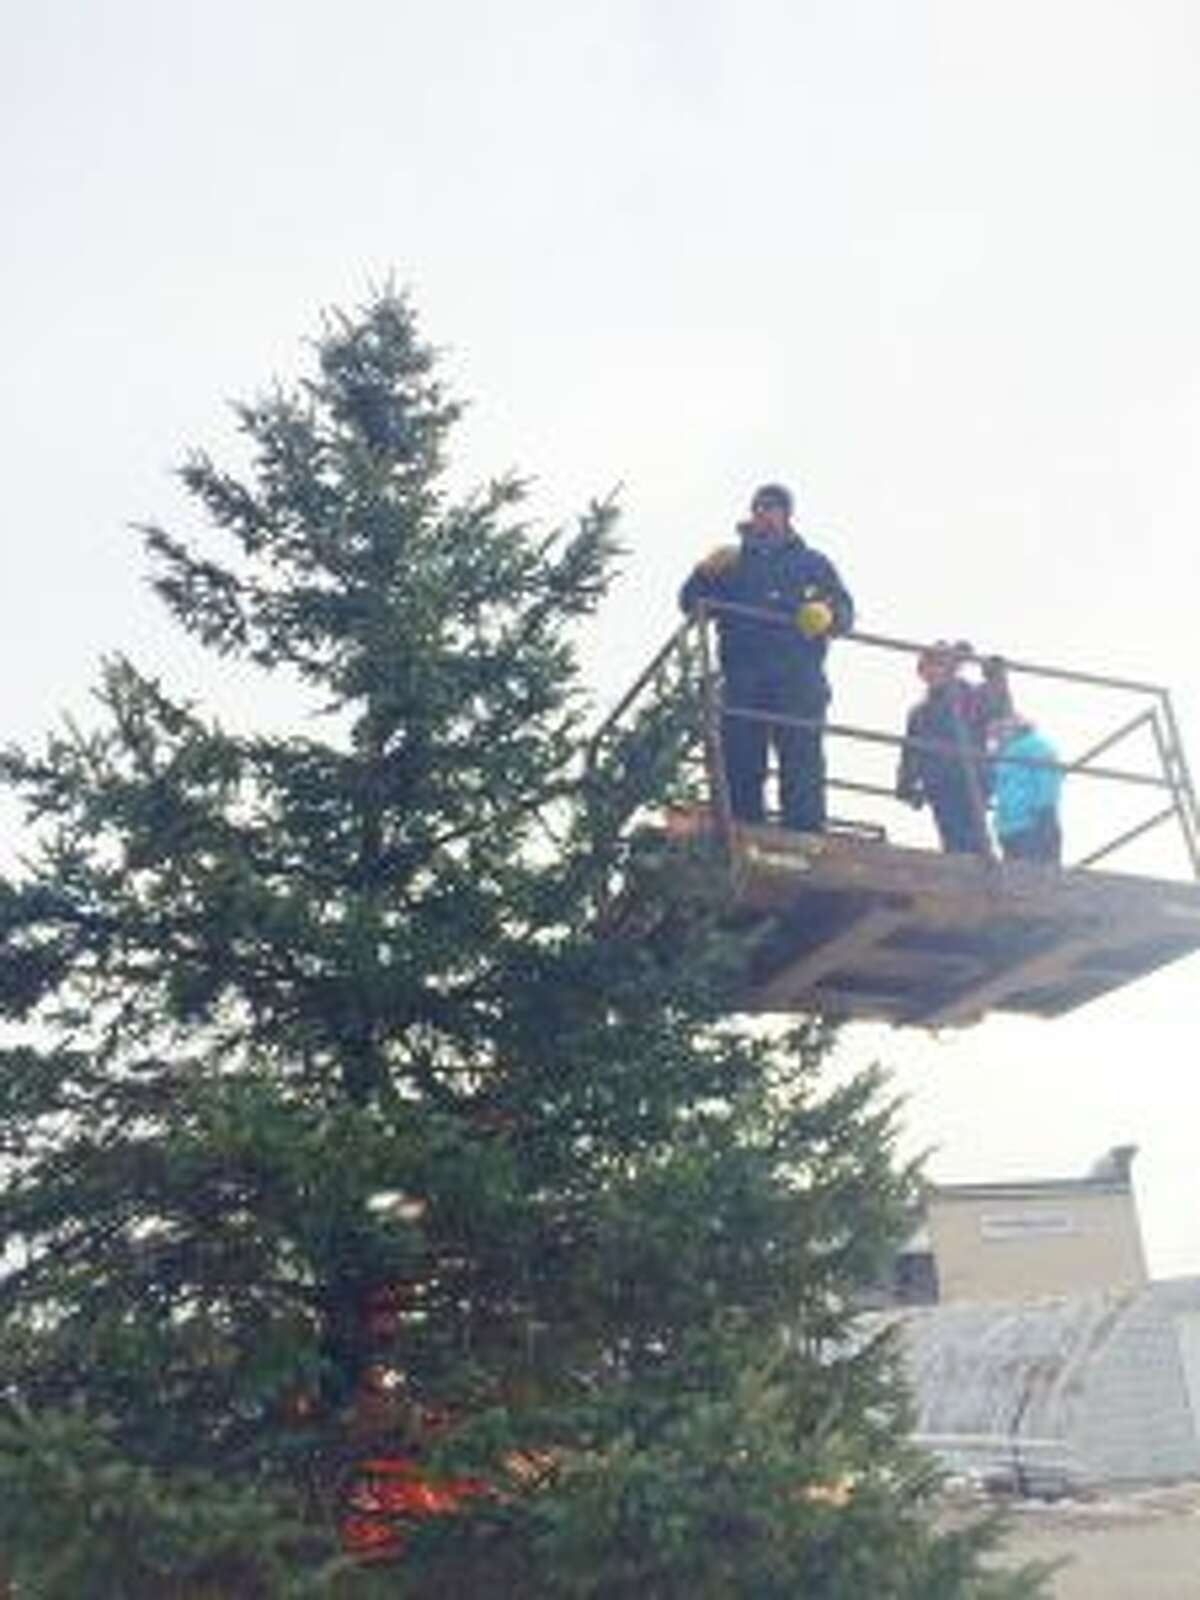 With a lift provided by Gerber Construction, Trinity’s men’s groups members Aaron Keup and Doug Emington help string the lights on the tree.